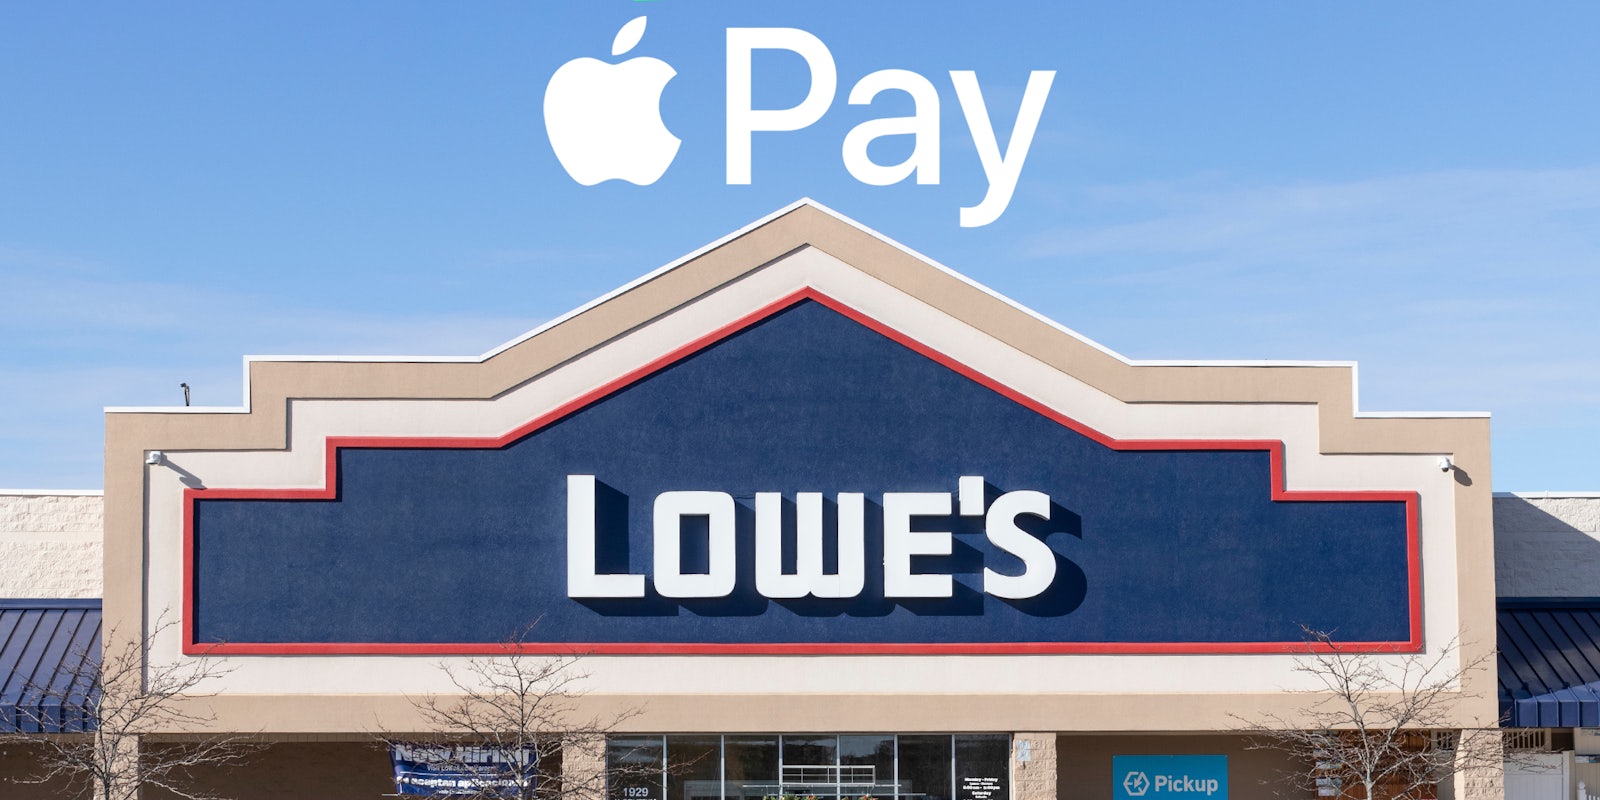 Apple Pay logo in blue sky above Lowe's building with sign